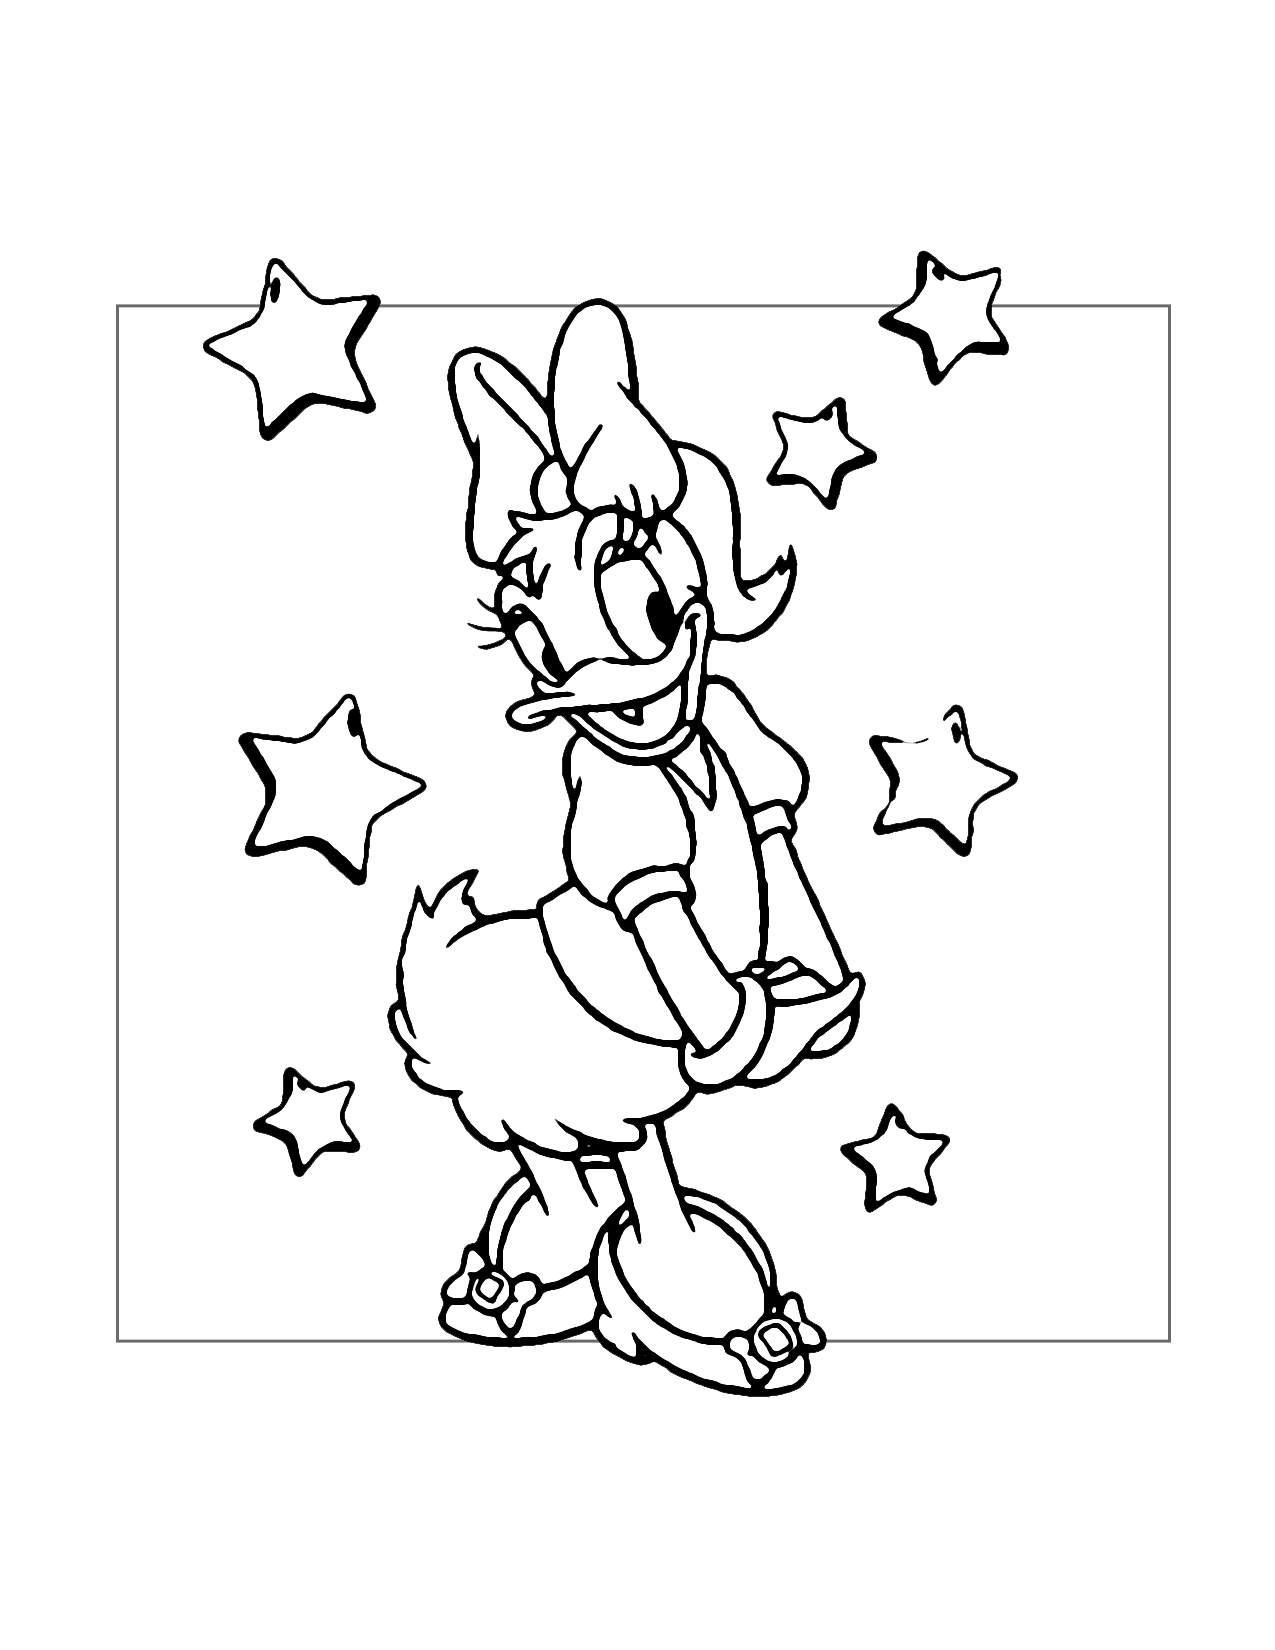 Daisy Duck Coloring Page